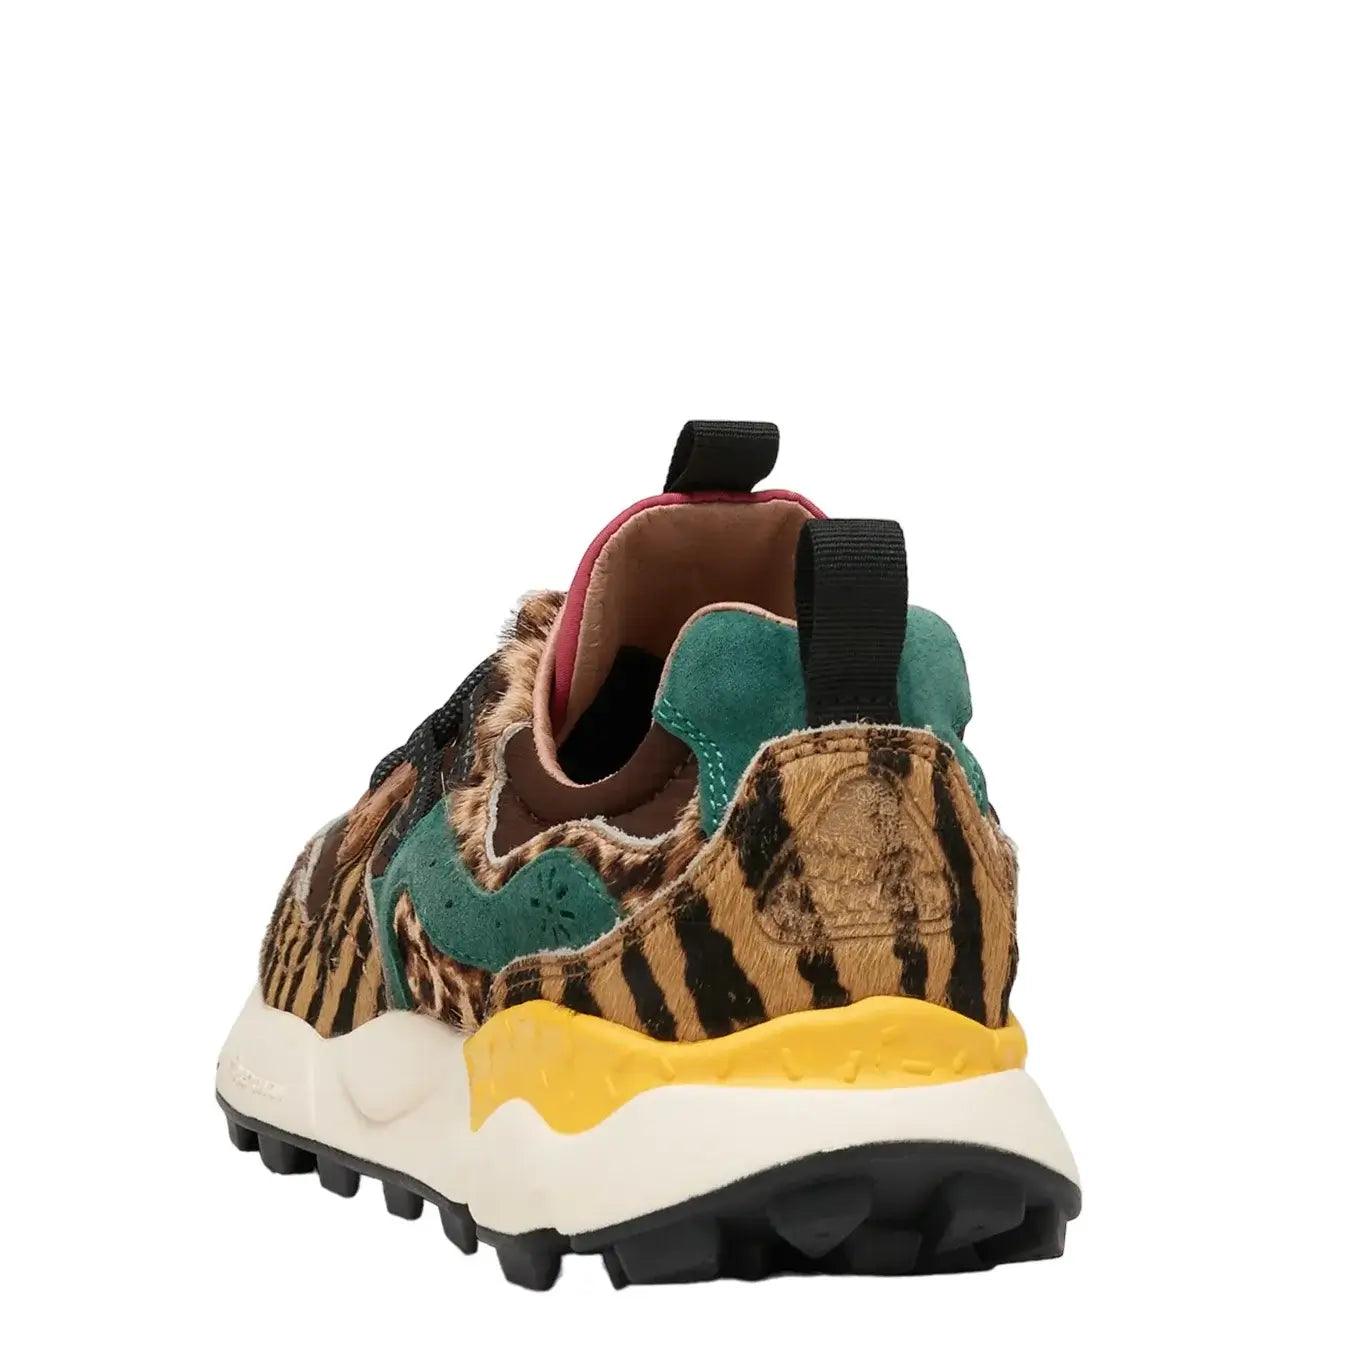 Flower m. Sneakers, 3d31, Yamano 3 Pony Hair Suede Nylon, Brown Multicolo, Bassiniboutique.it, 2023 a/i